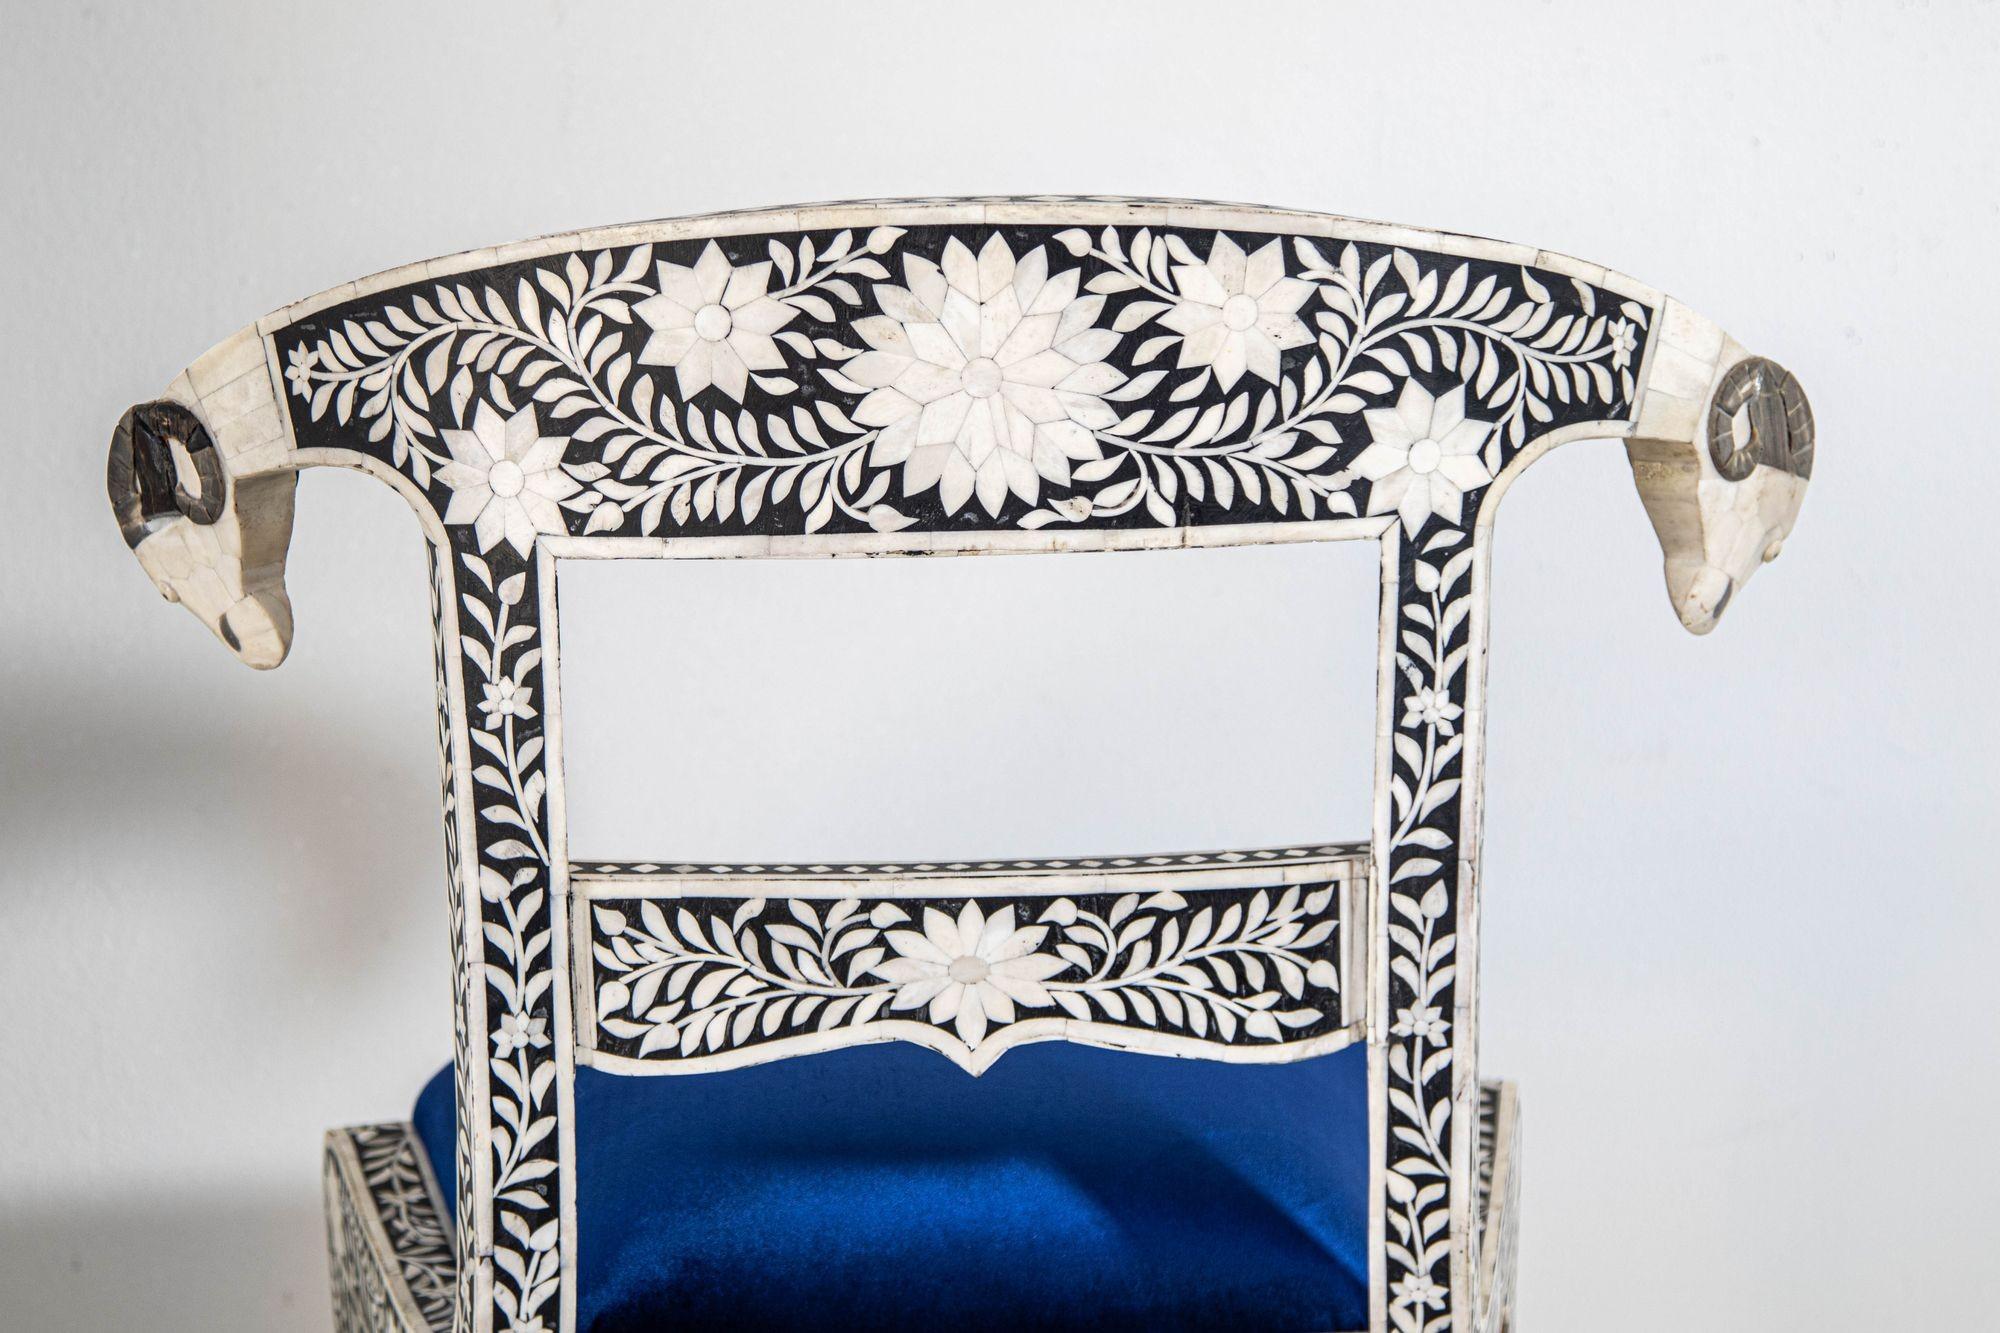 Antique Anglo-Indian Side Chair with Ram's Head Bone Inlaid Royal Blue Seat For Sale 7